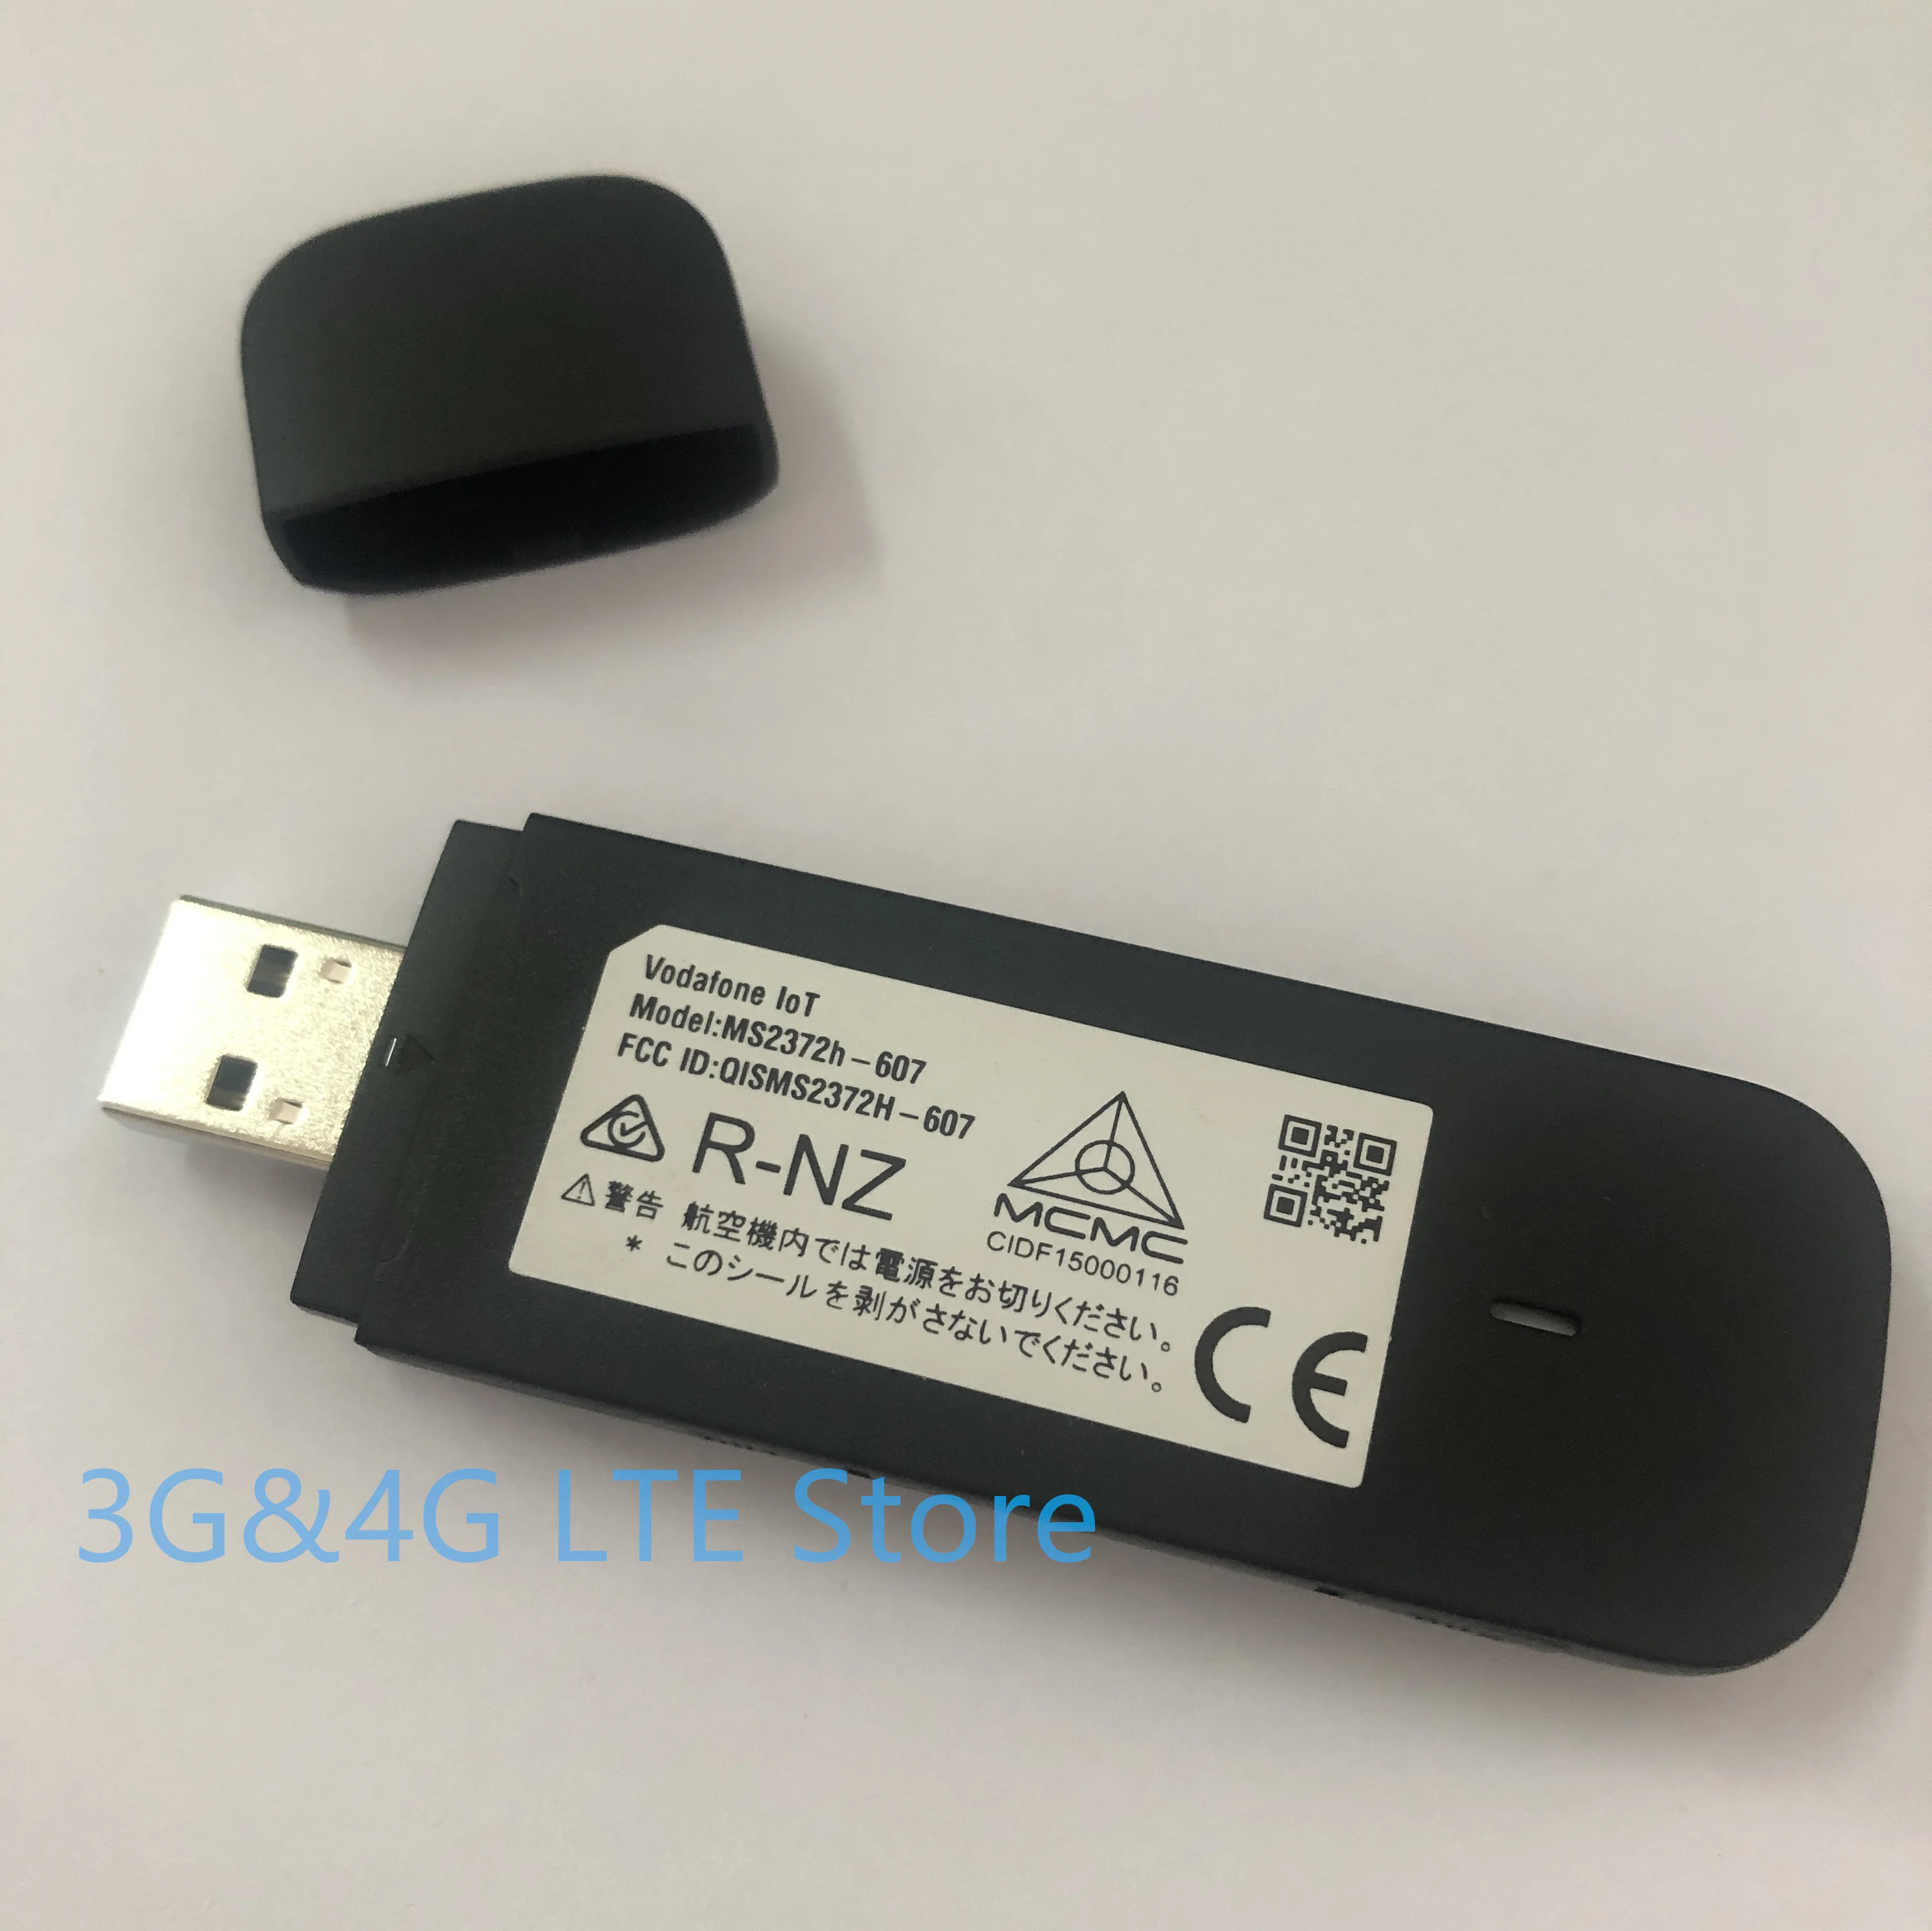 Unlocked Huawei MS2372 ms2372h-607 ms2372h-153 ms2372h-517 3g 4G LTE Cat.4 Industrial IoT Dongle 